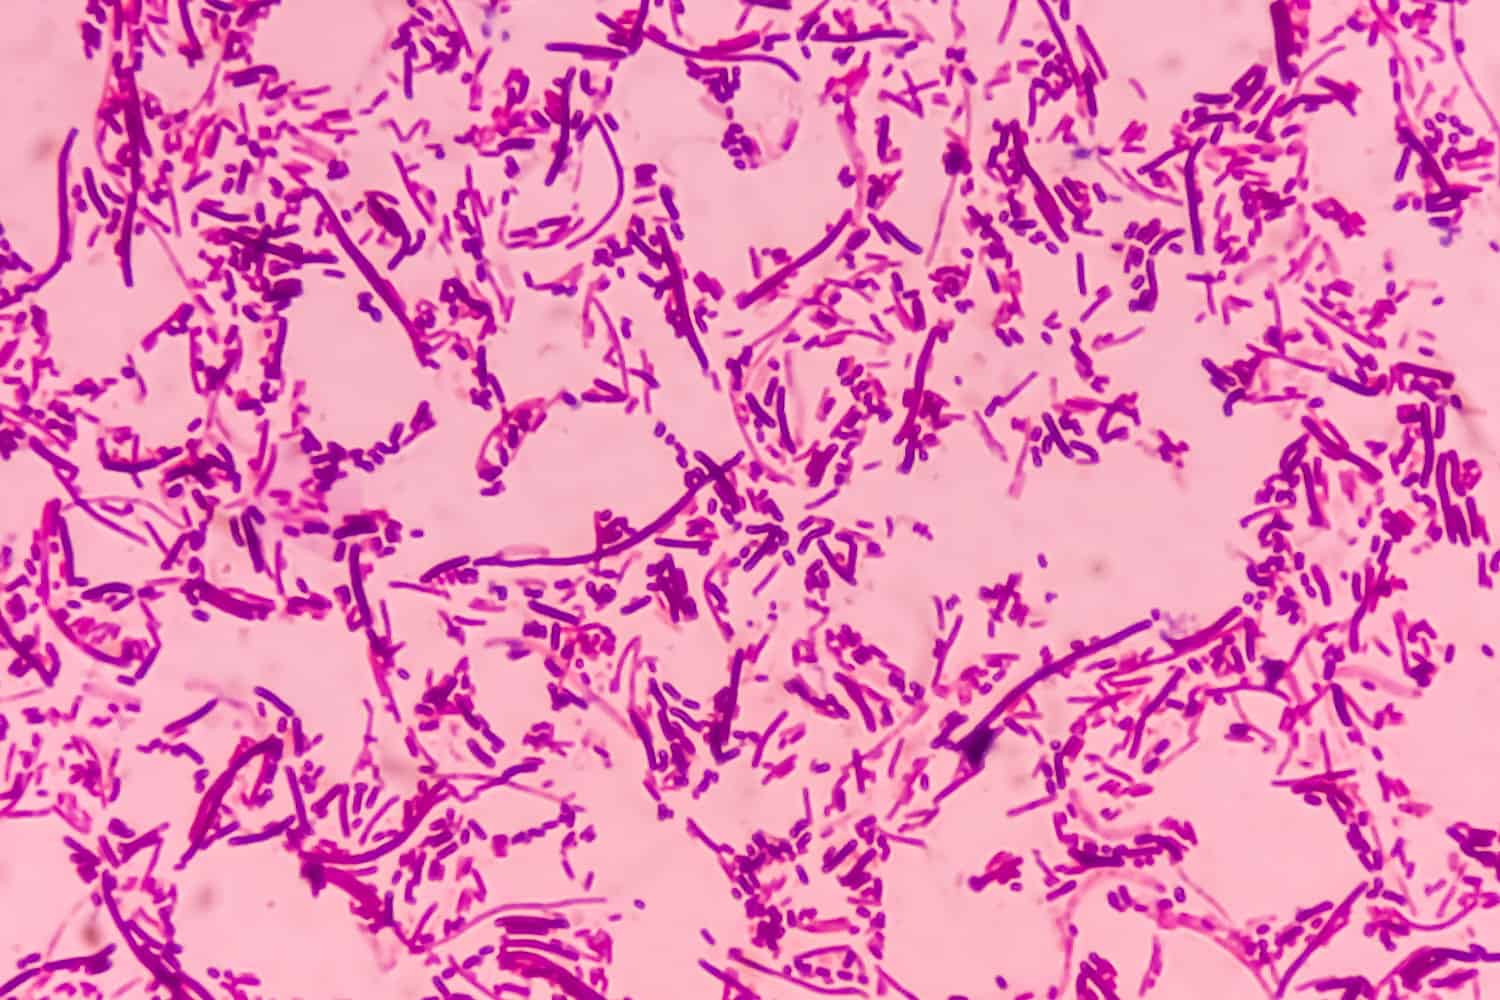 Salmonellosis microscopic view of gram stained slide from blood agar salmonella colonies, show Salmonella Typhi (S. Typhi) bacteria, disease is referred to as typhoid fever.